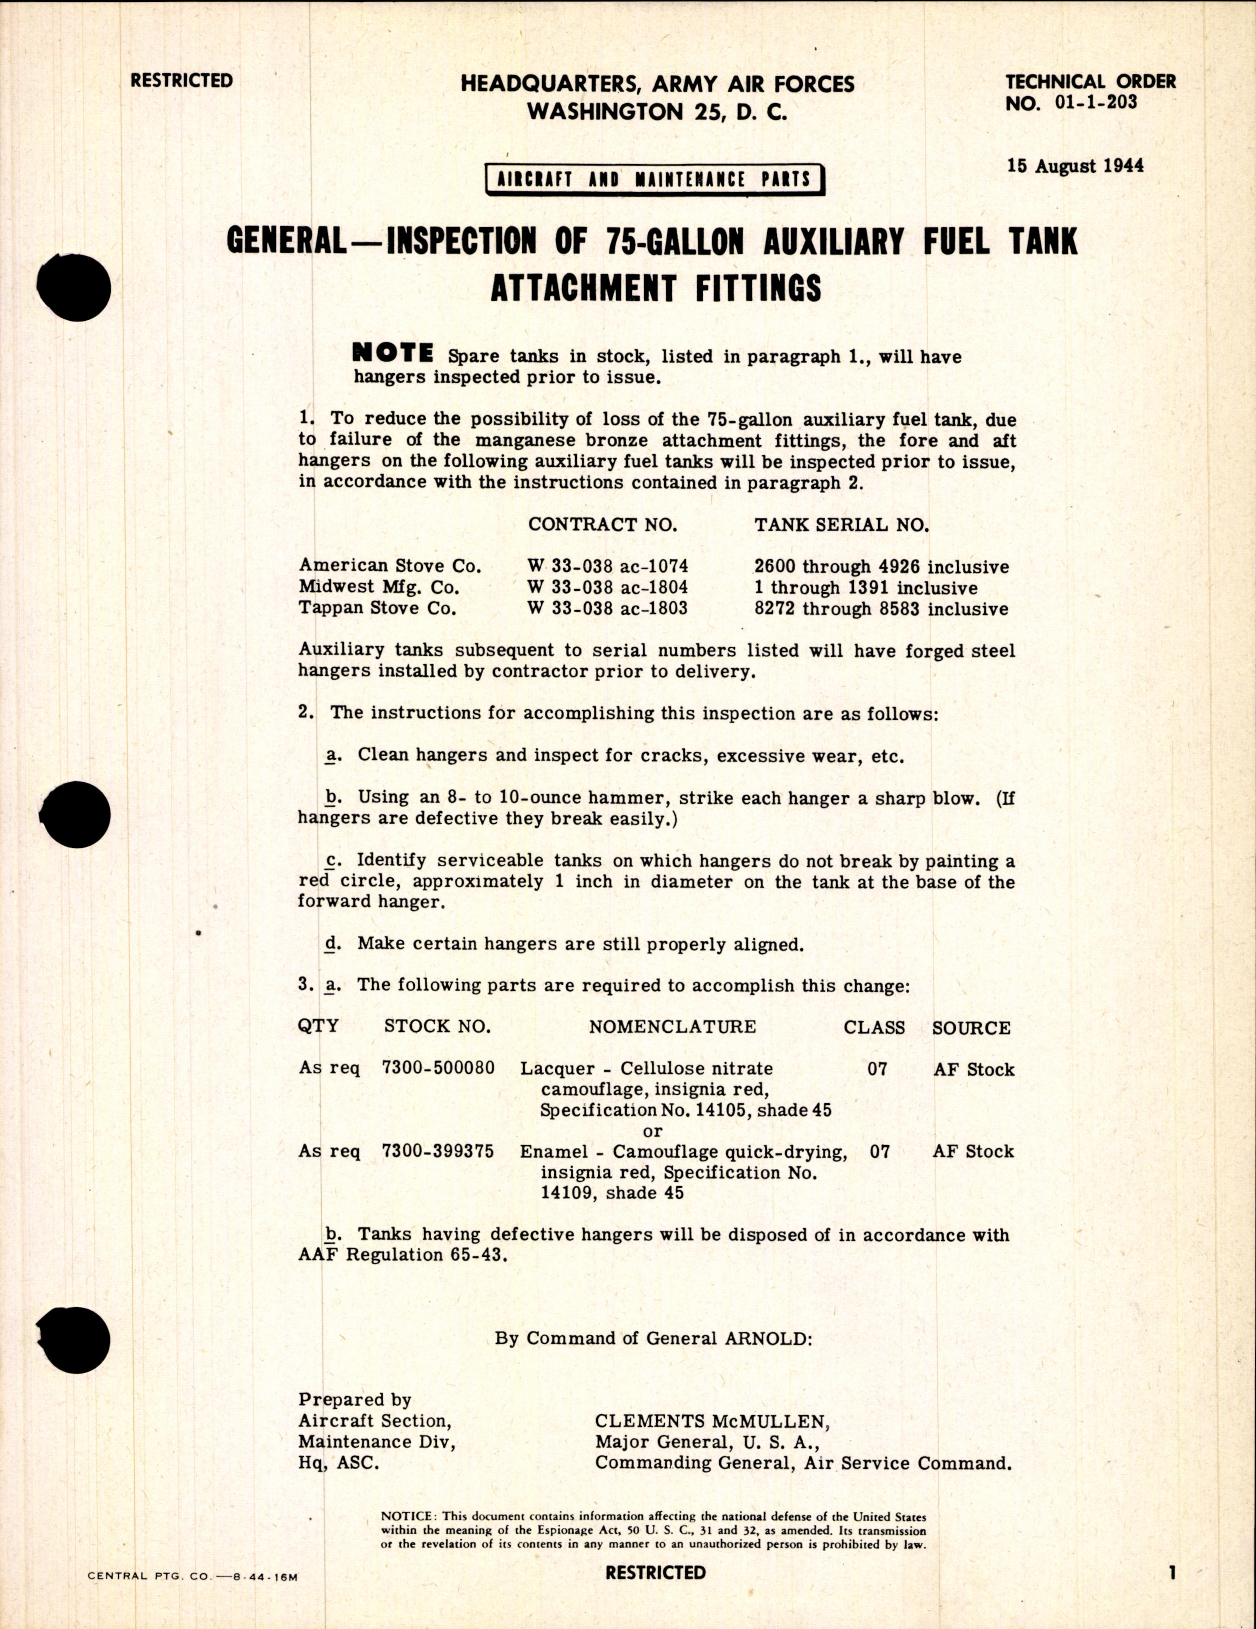 Sample page 1 from AirCorps Library document: Aircraft and Maintenance Parts; Inspection of 75 Gallon Auxiliary Fuel Tank Attachment Fittings